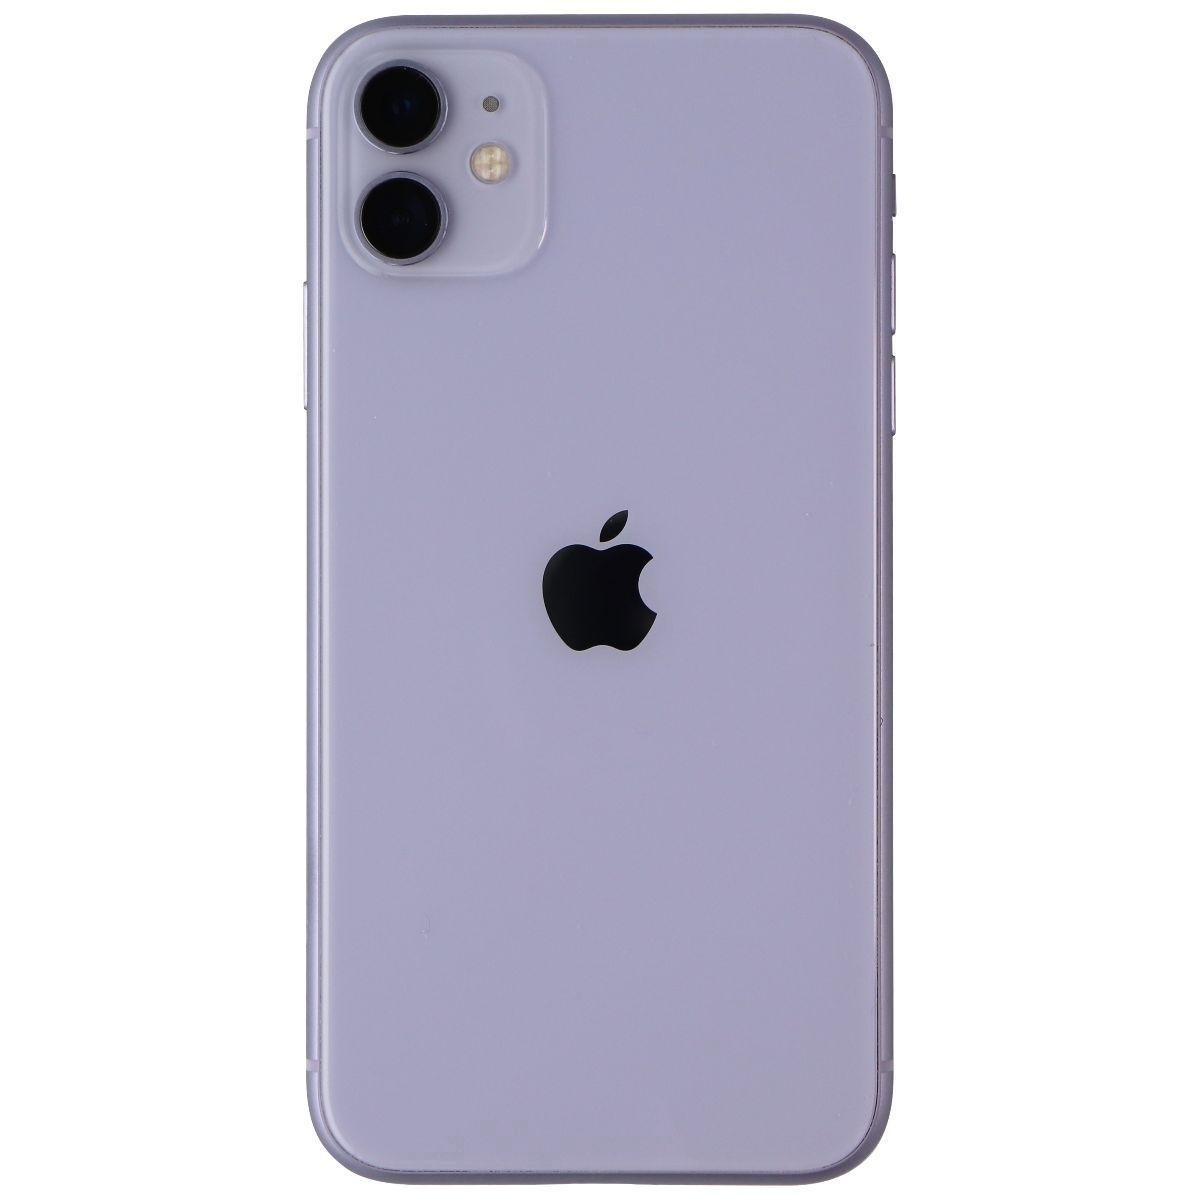 Apple IPhone 11 (6.1-inch) Smartphone (A2111) T-Mobile ONLY - 64GB / Purple